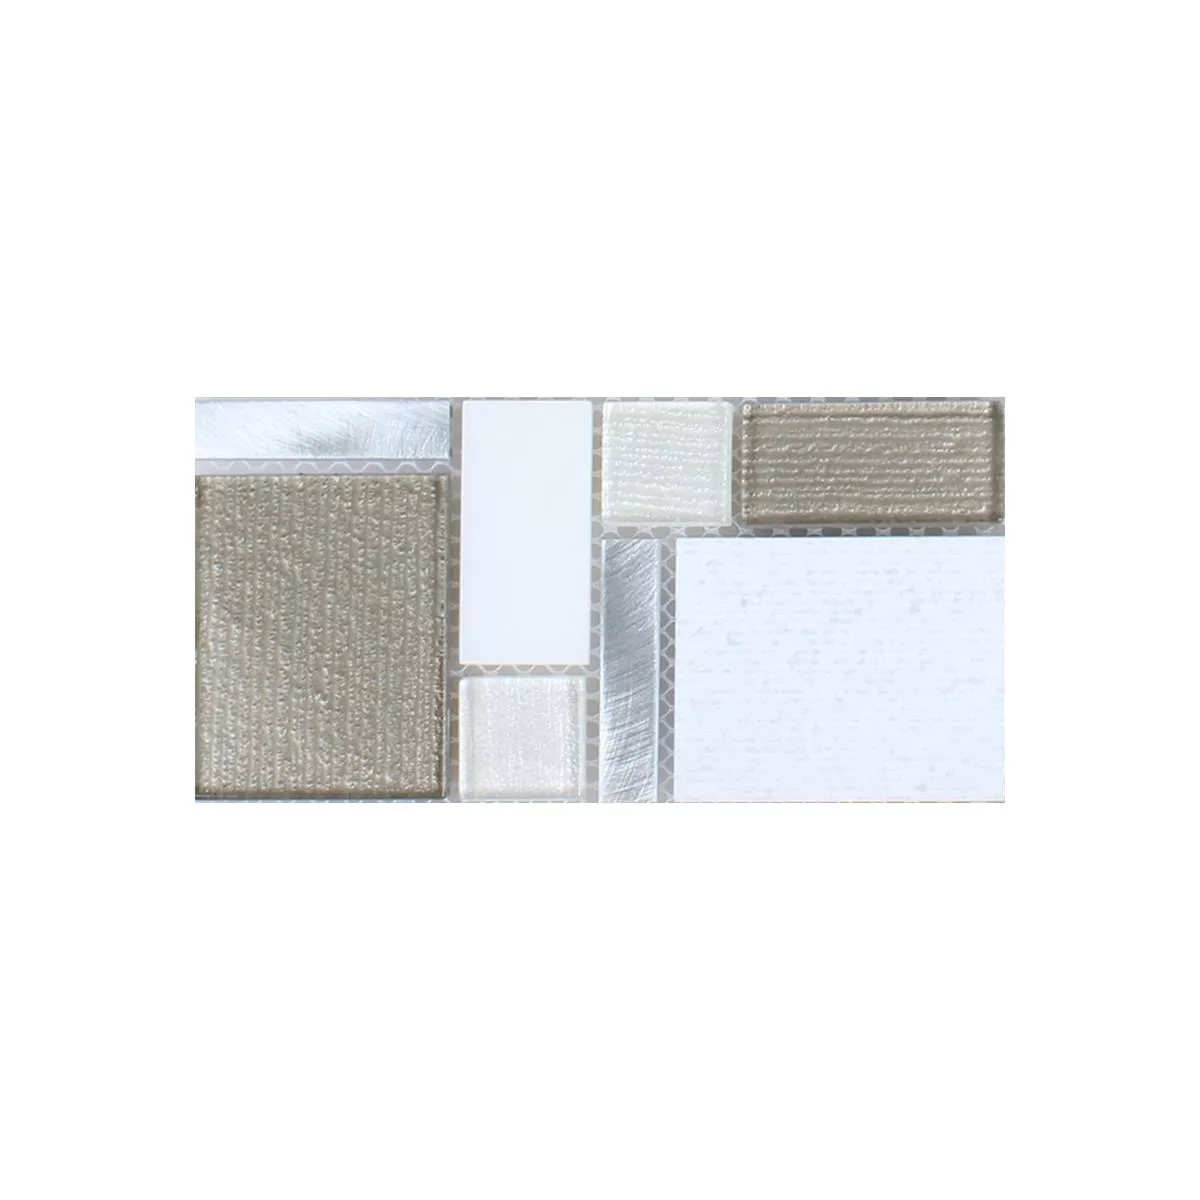 Sample Mosaic Tiles Material Mix Echo White Beige